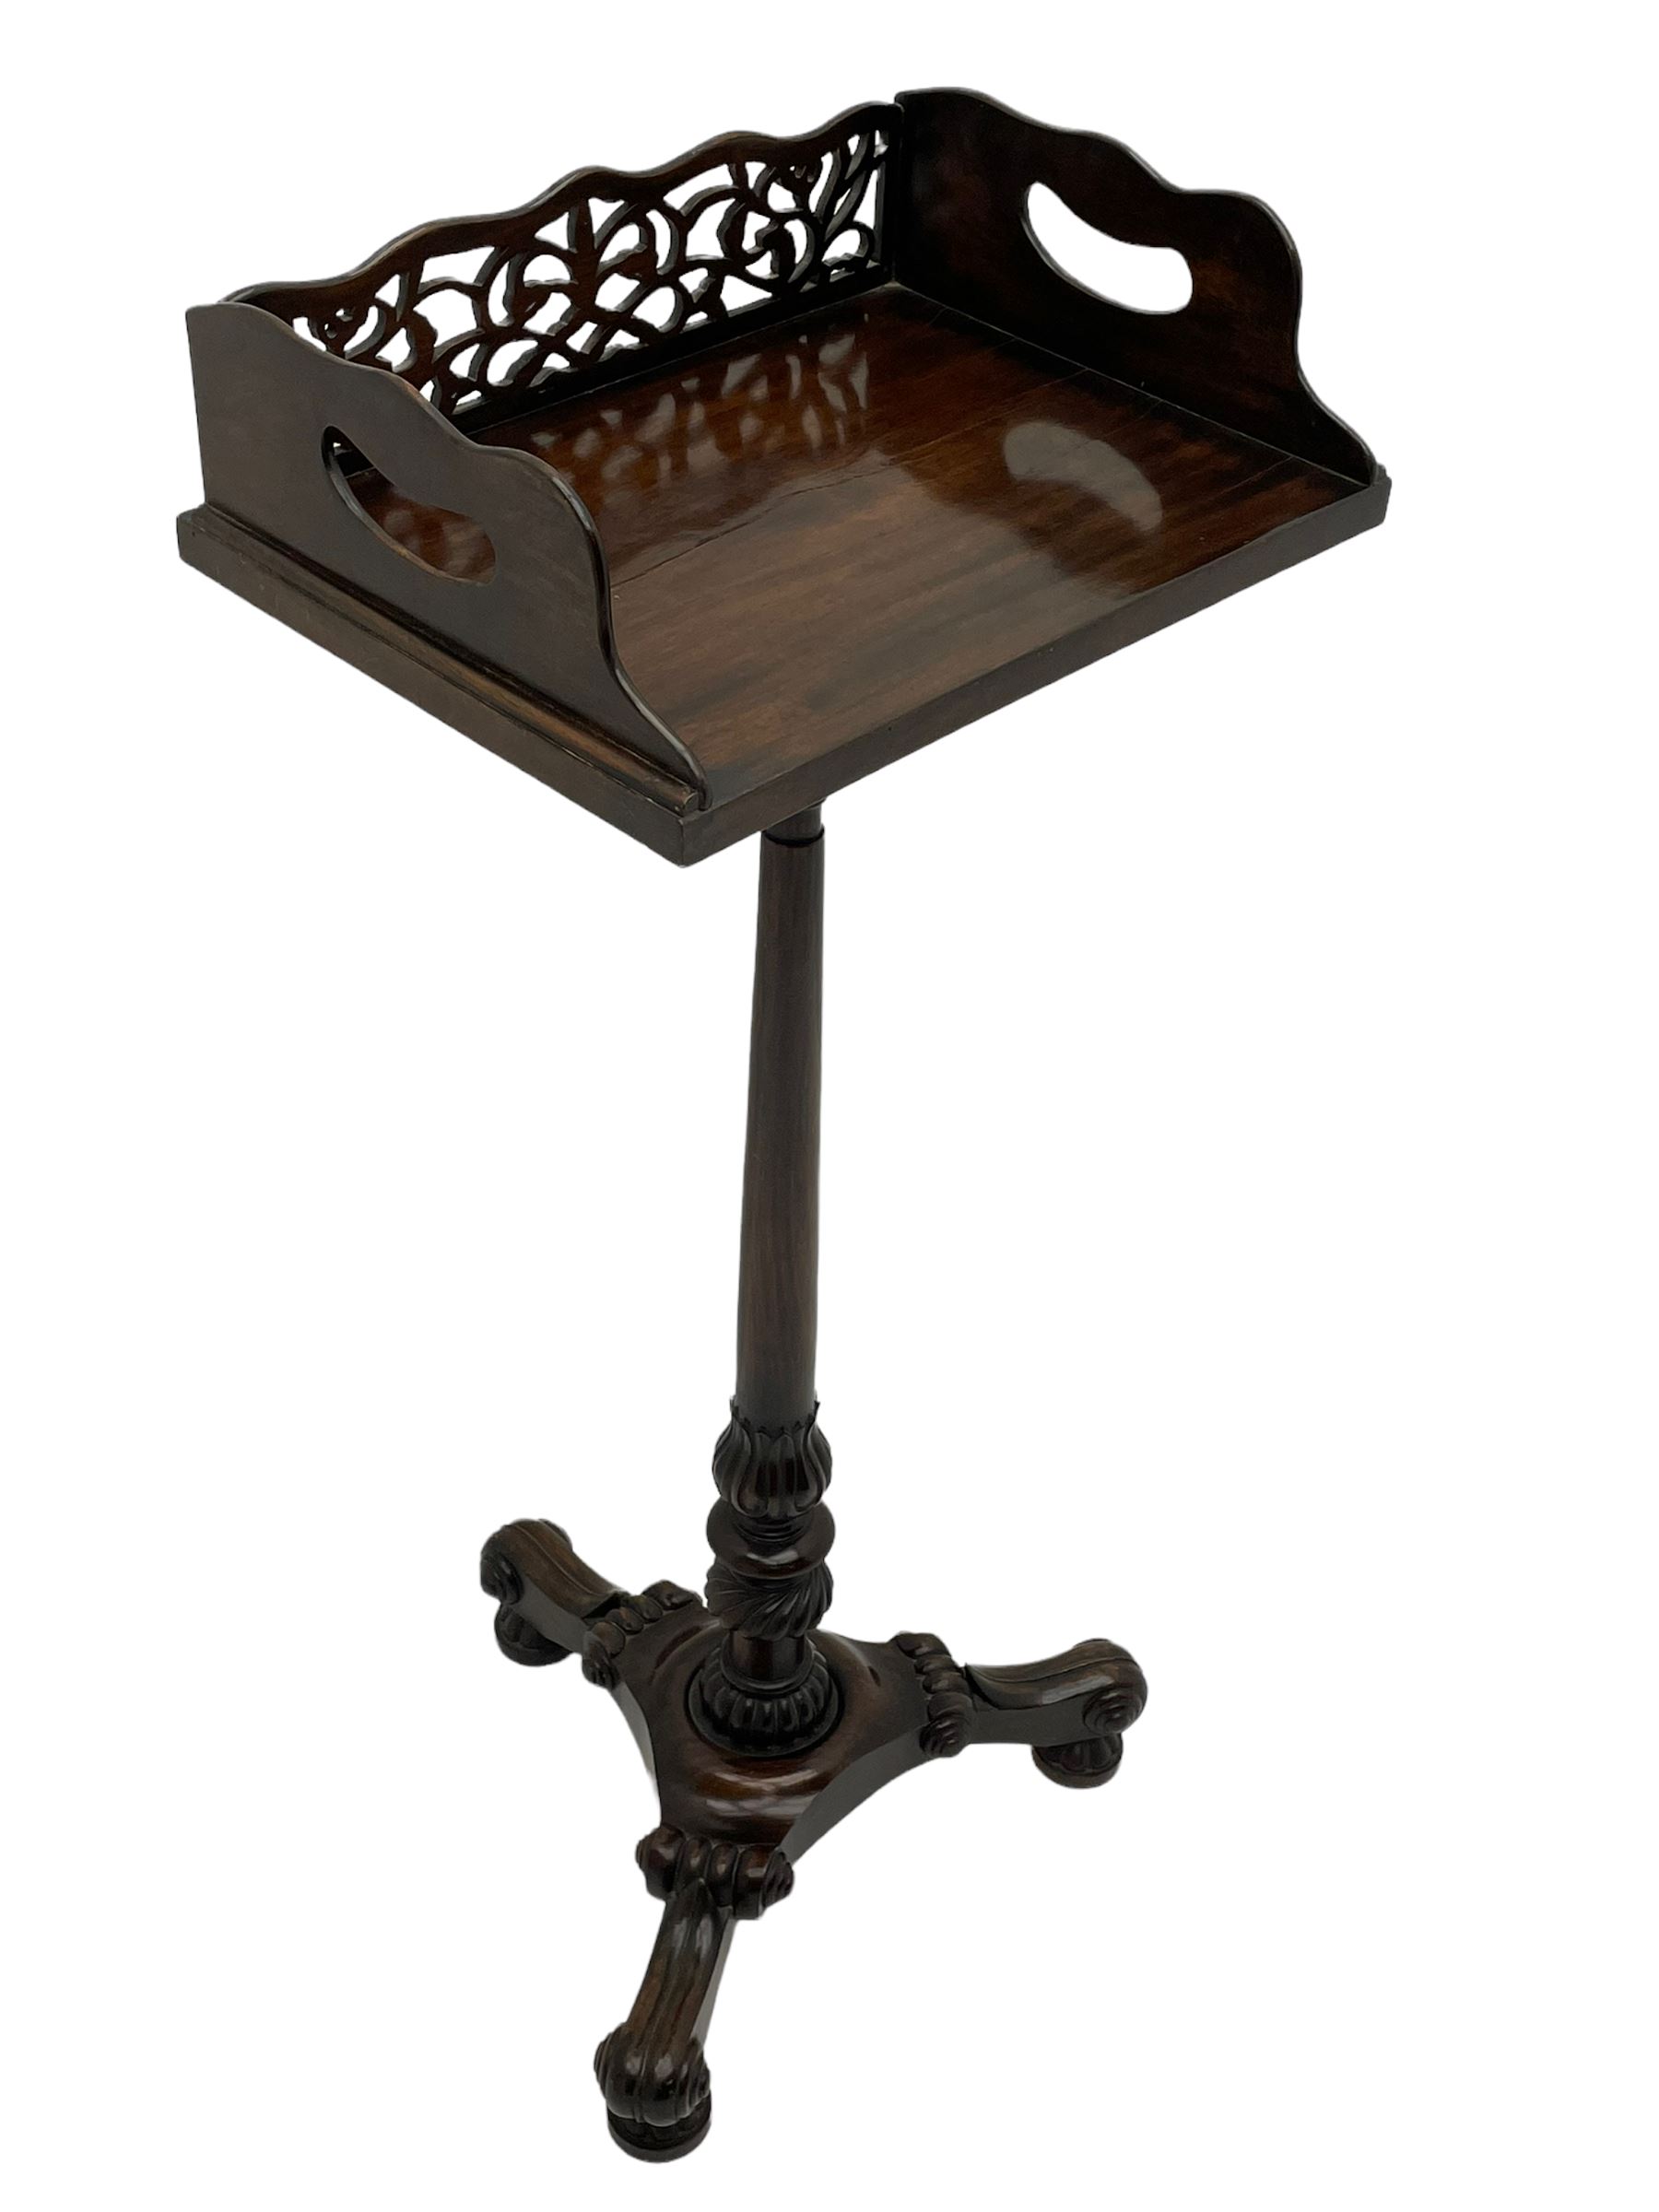 Regency style hardwood book tray on stand - Image 4 of 7